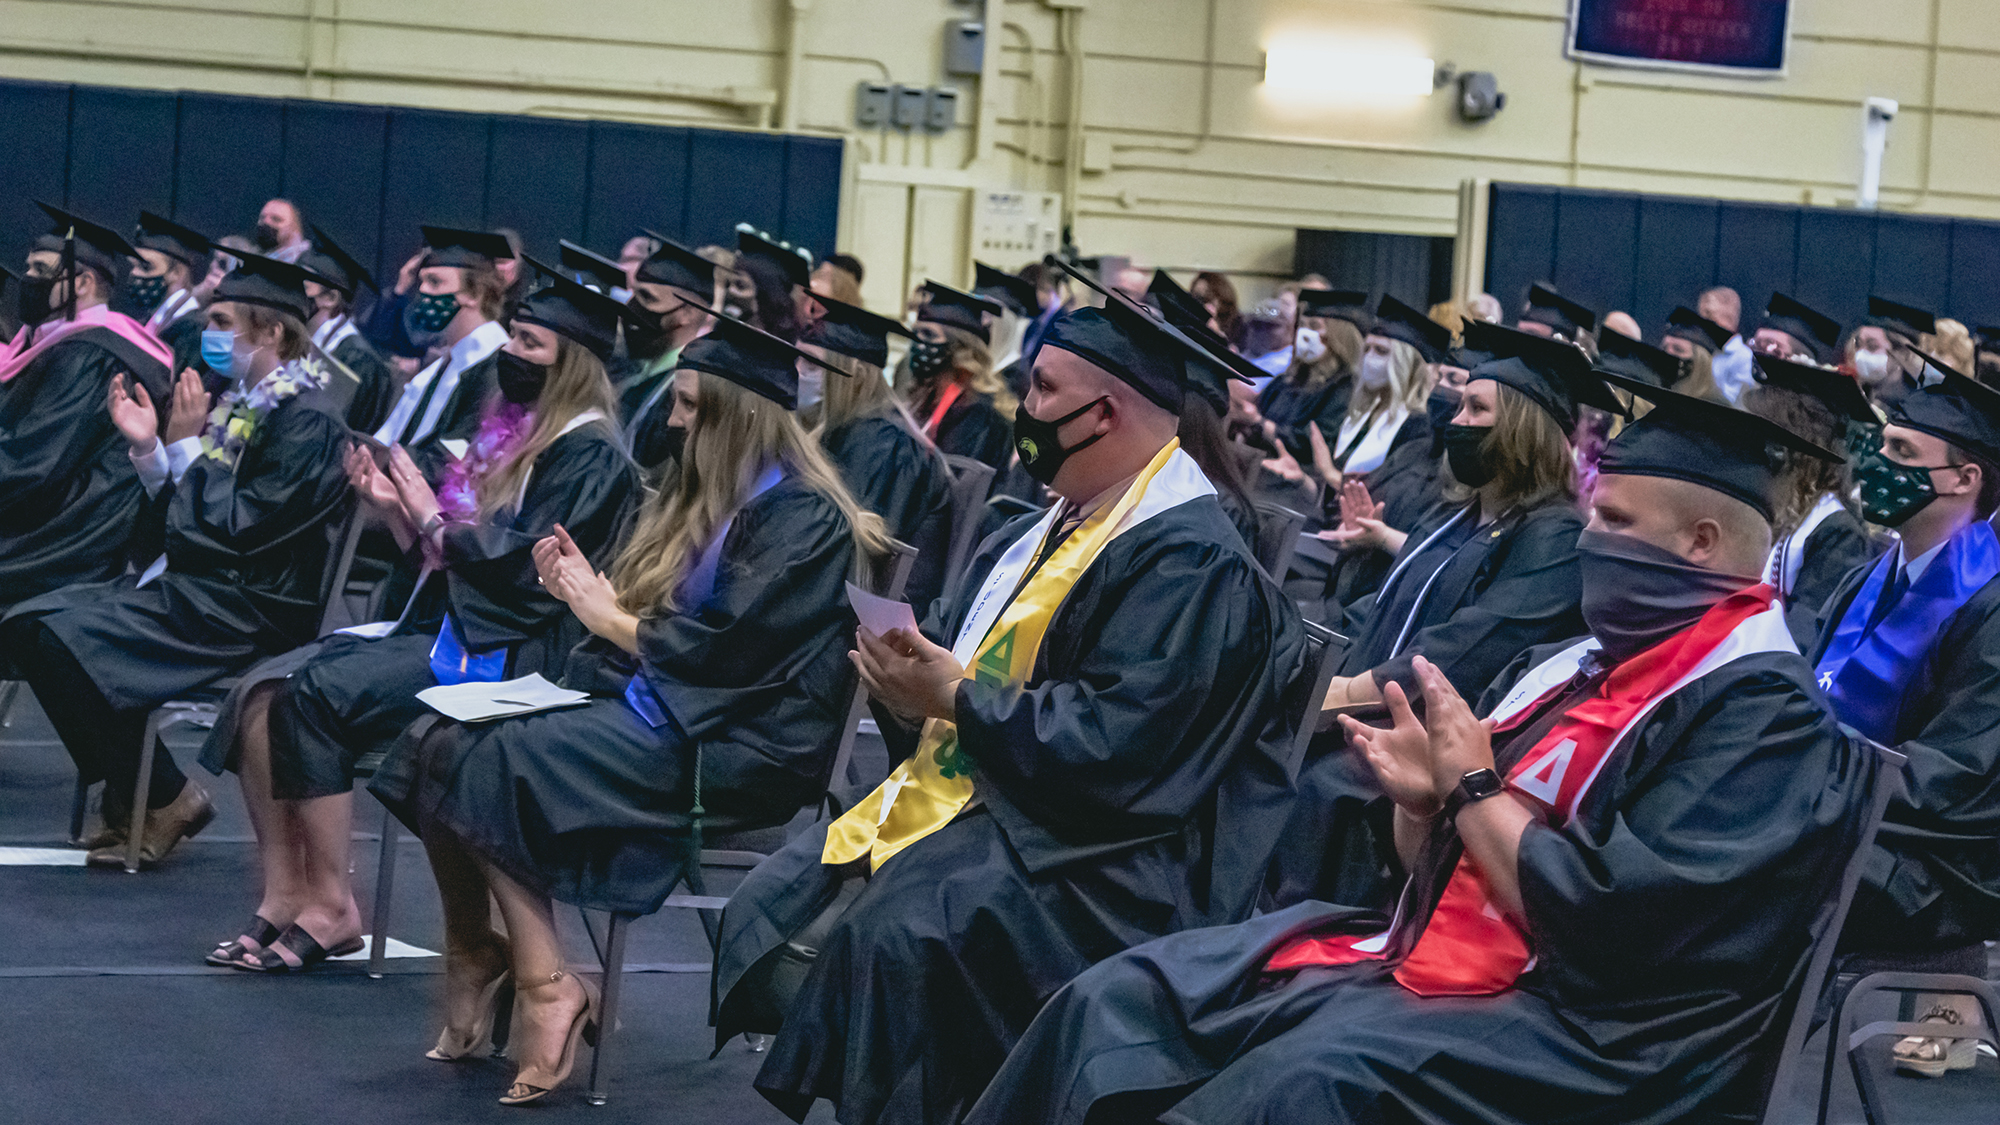 Spring 2021 Commencement